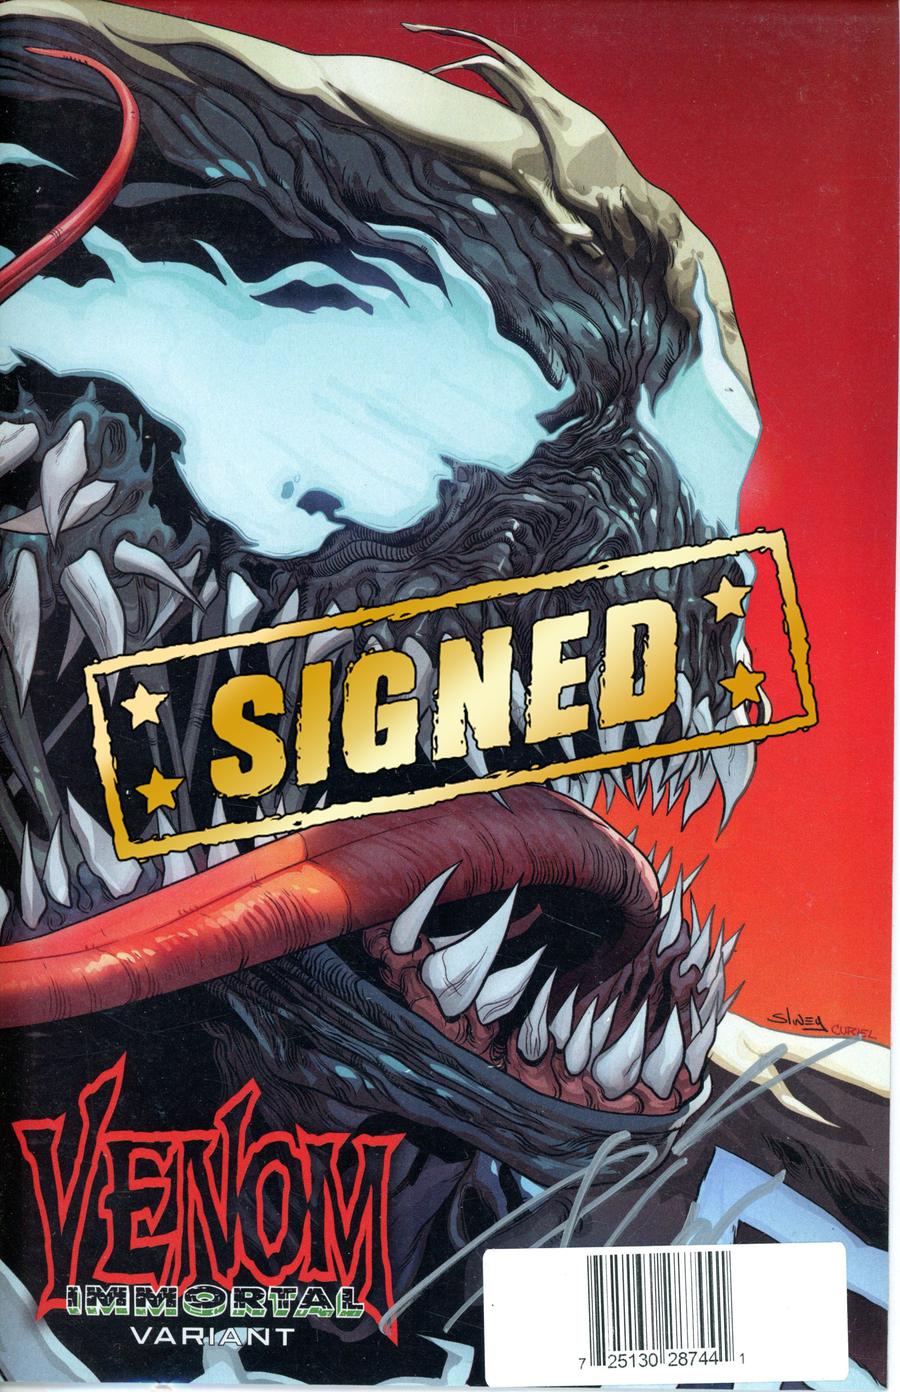 Venom Vol 4 #18 Cover D DF Variant Will Sliney Immortal Wraparound Cover Silver Signature Series Signed By Donny Cates